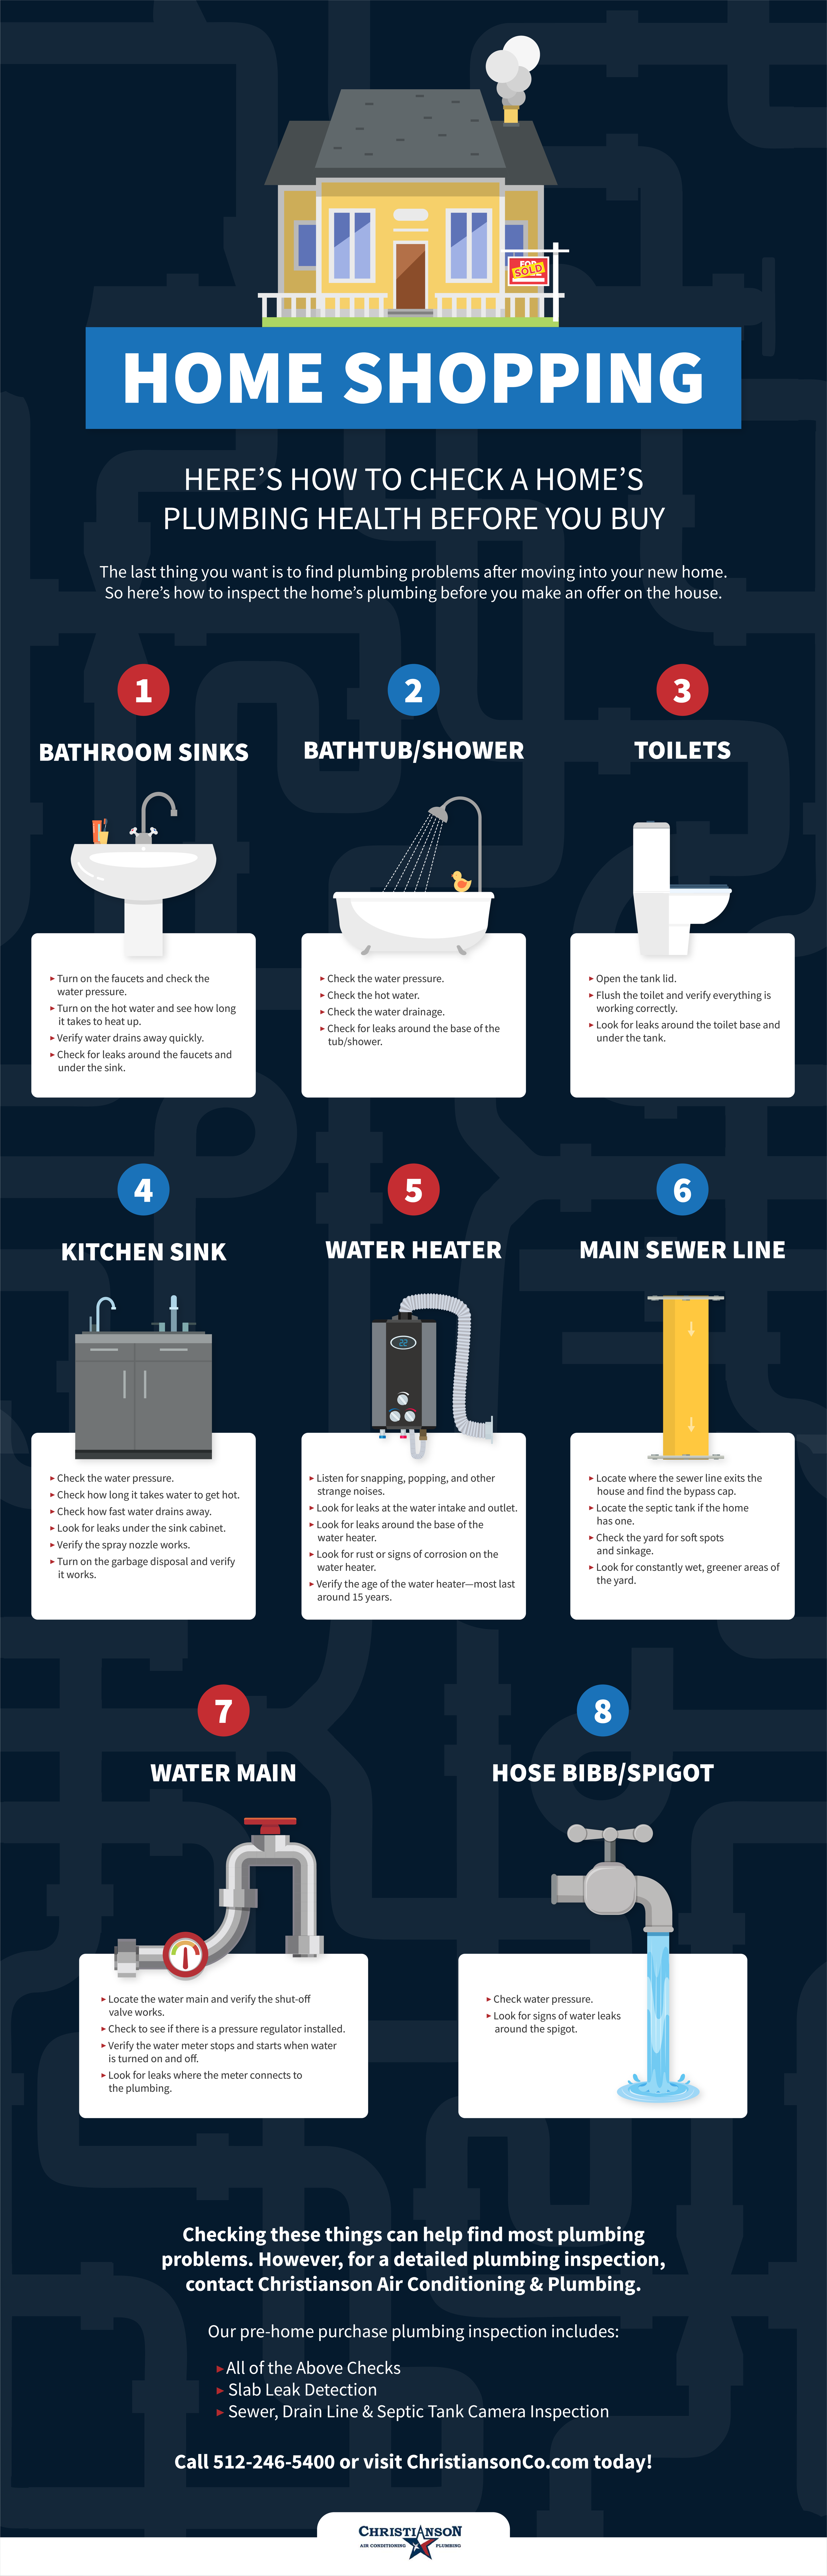 Plumbing Health Checkup Before You Buy The House Infographic